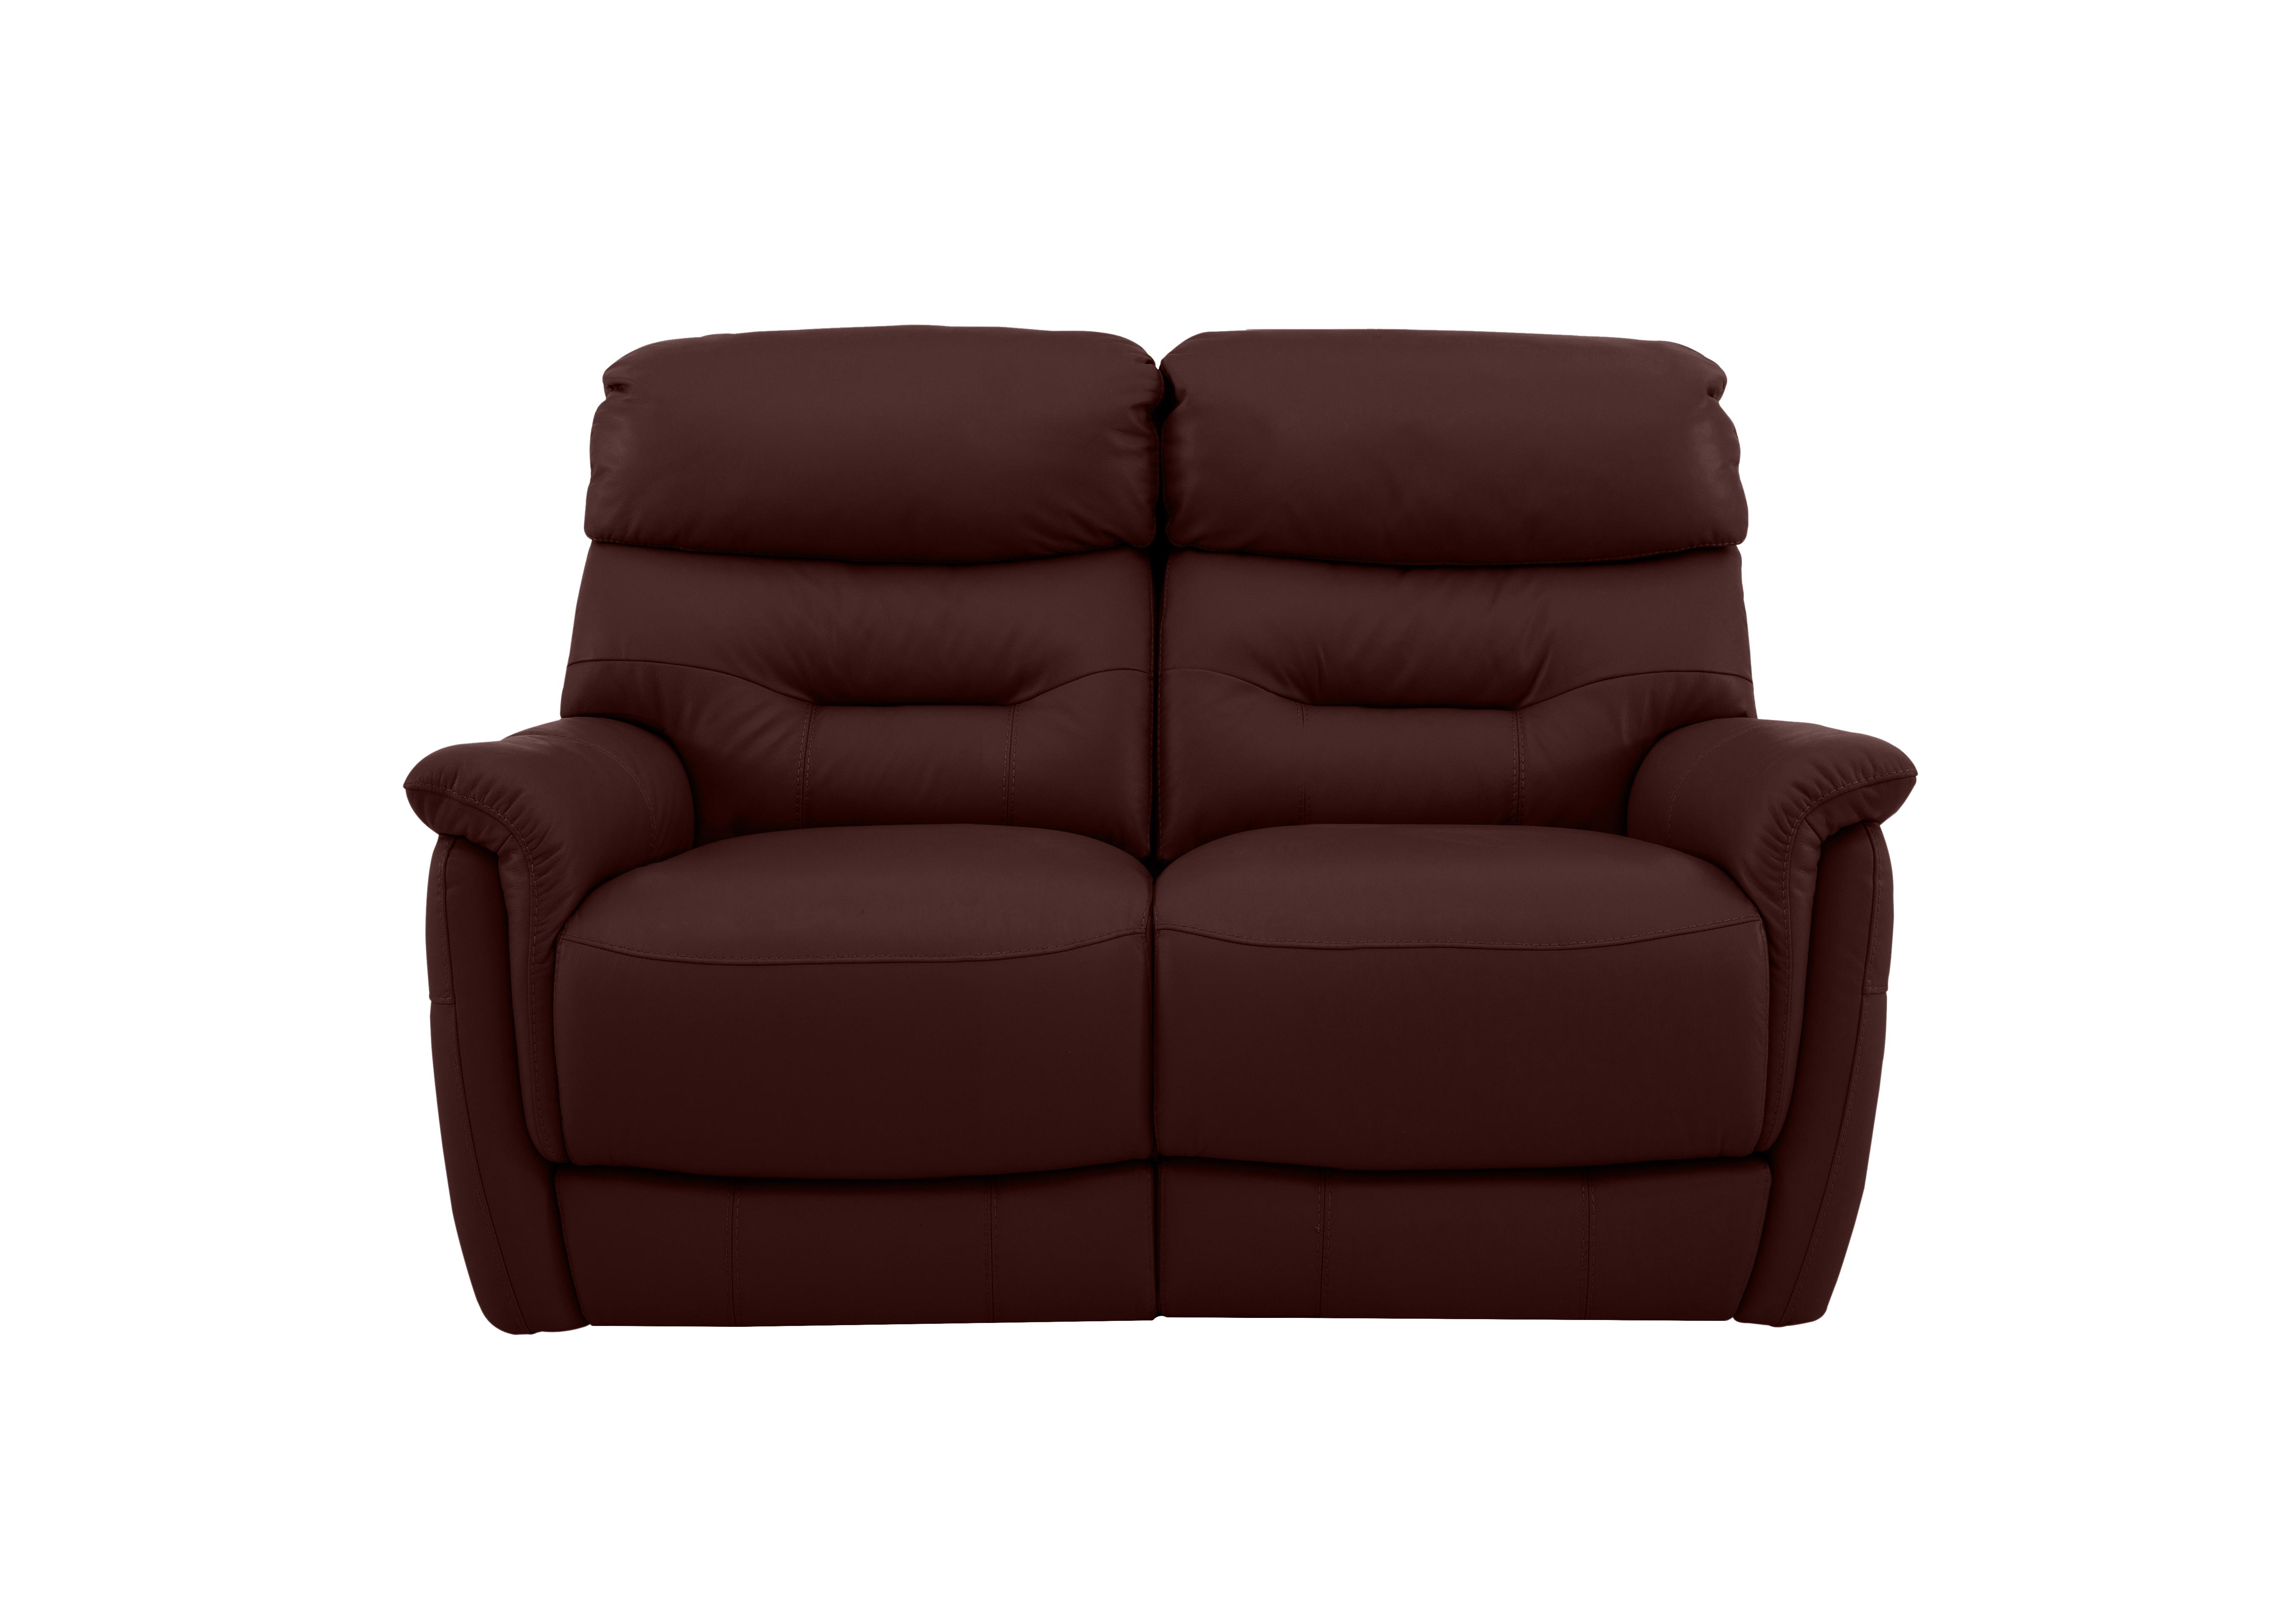 Chicago 2 Seater Leather Sofa in An-751b Burgundy on Furniture Village